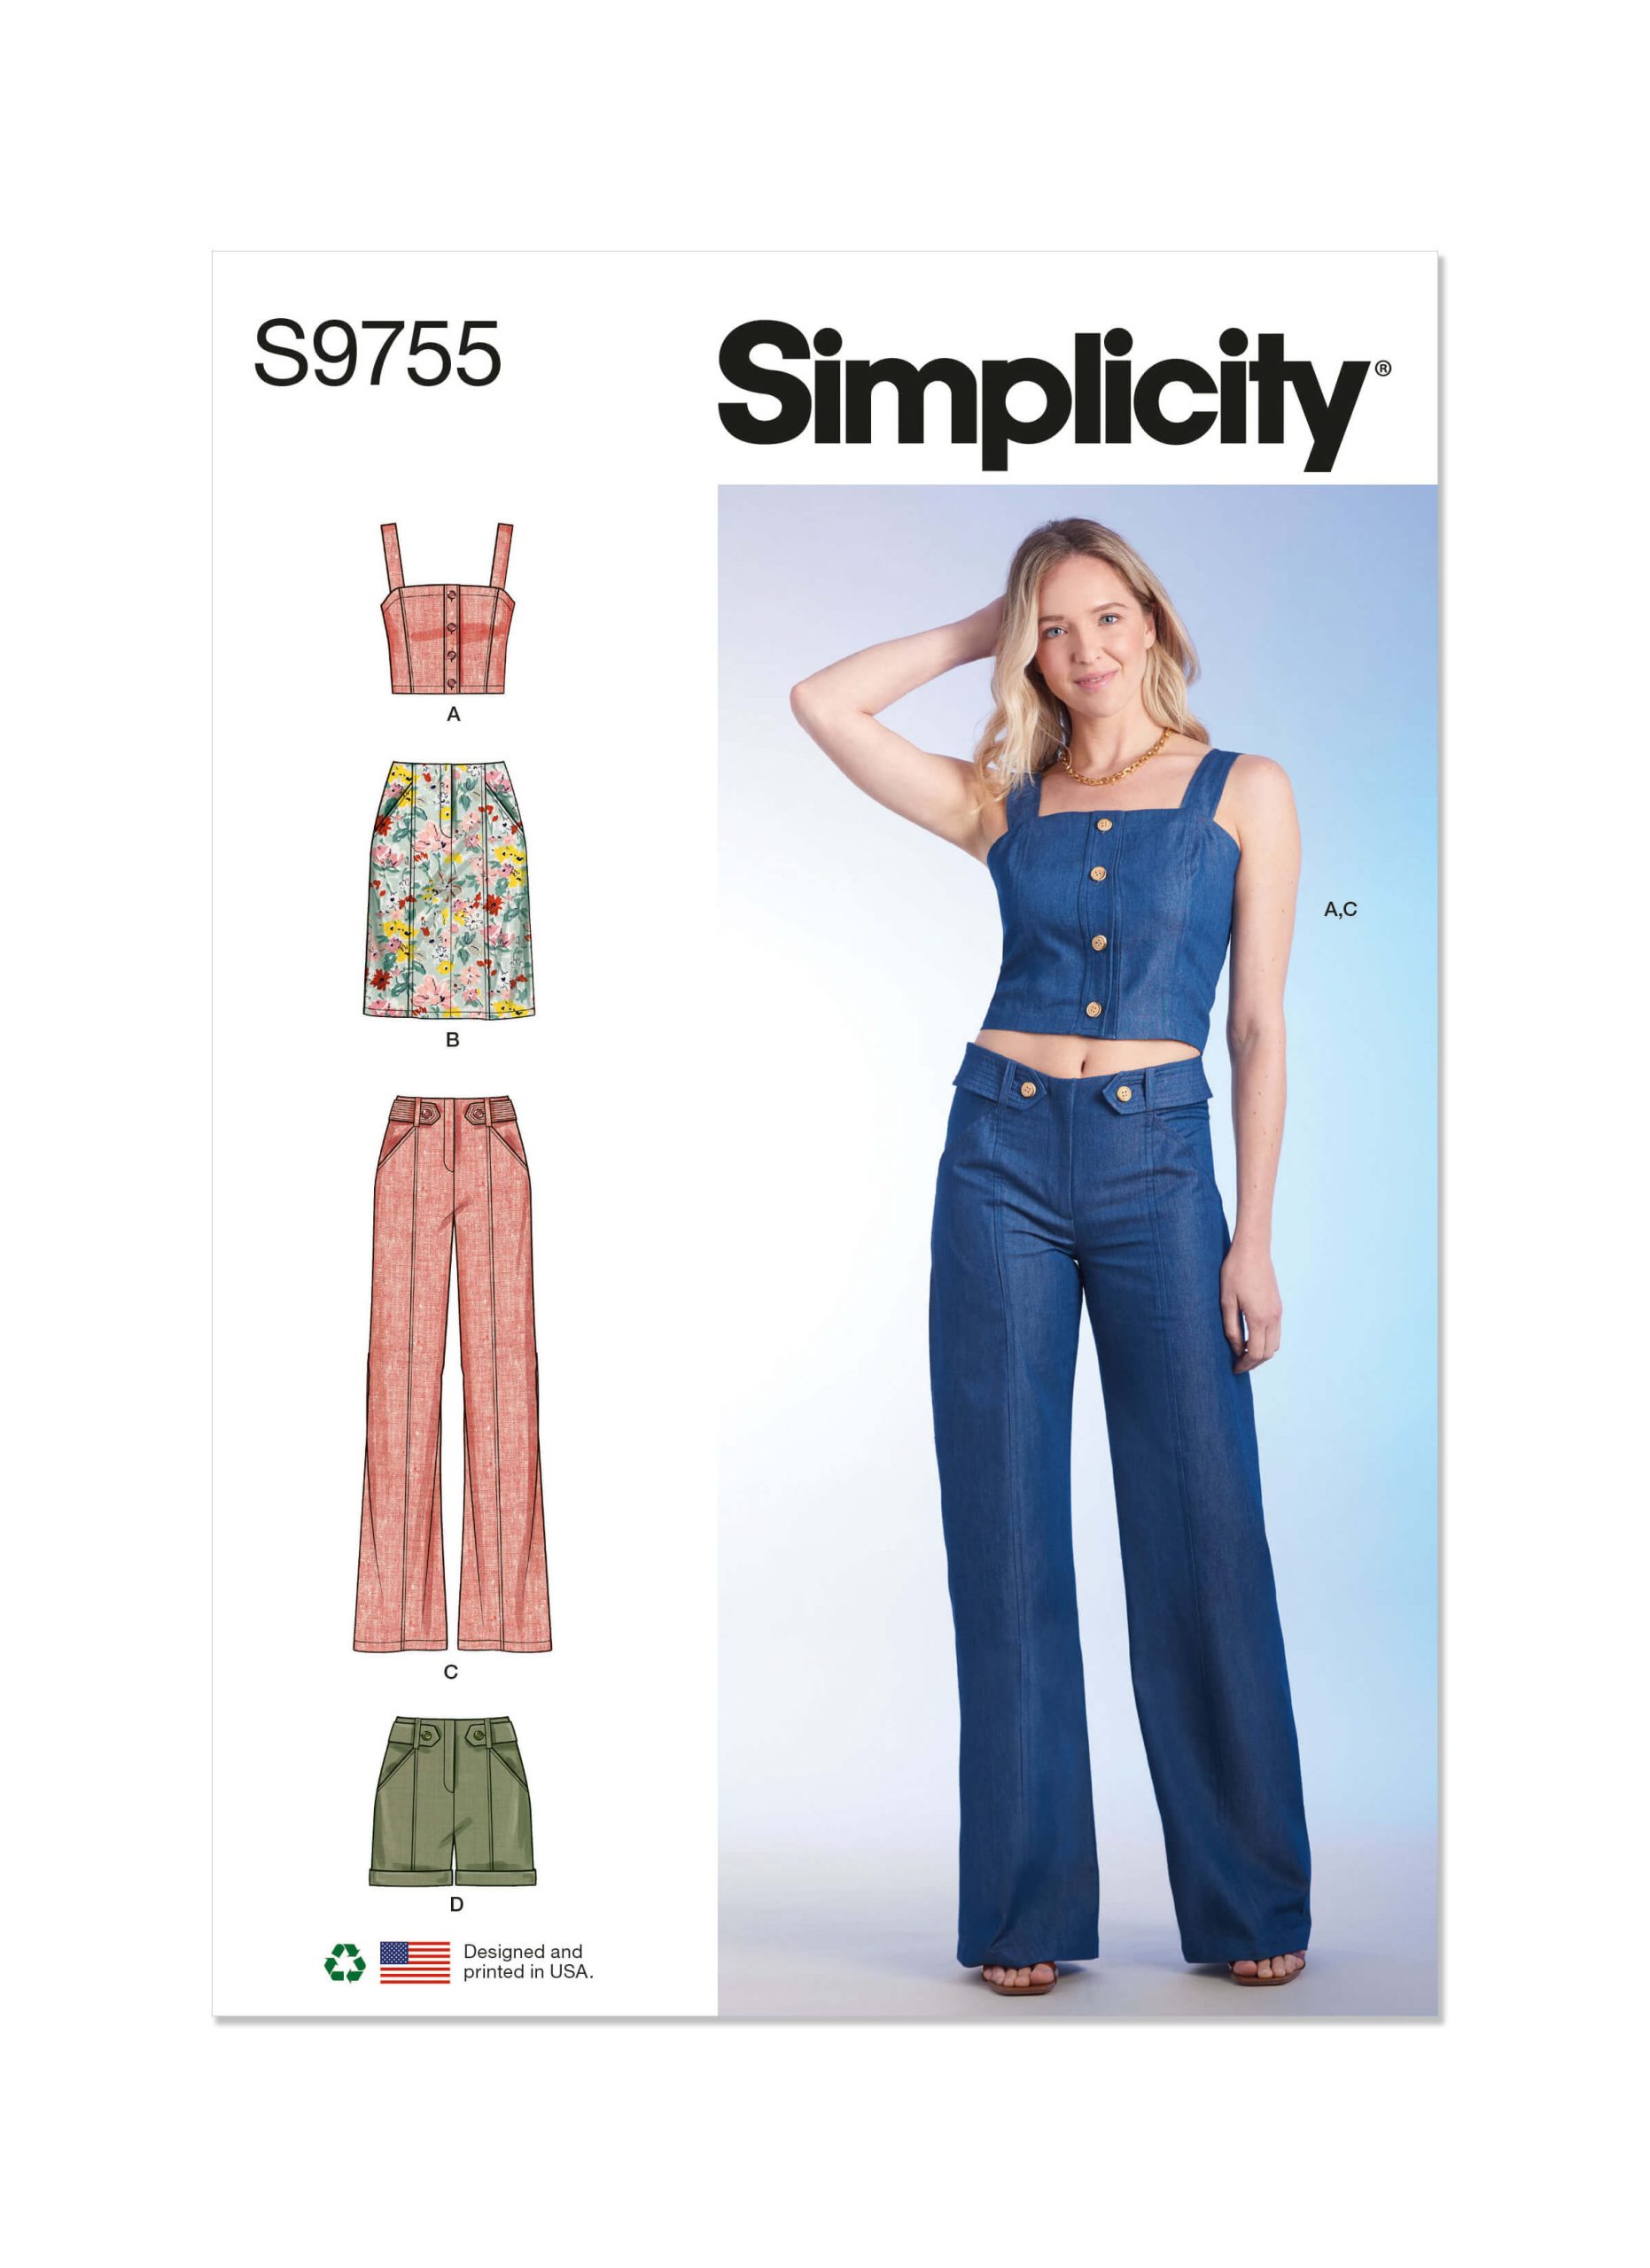 Simplicity Sewing Pattern S9755 Misses' Top, Skirt, Trousers and Shorts